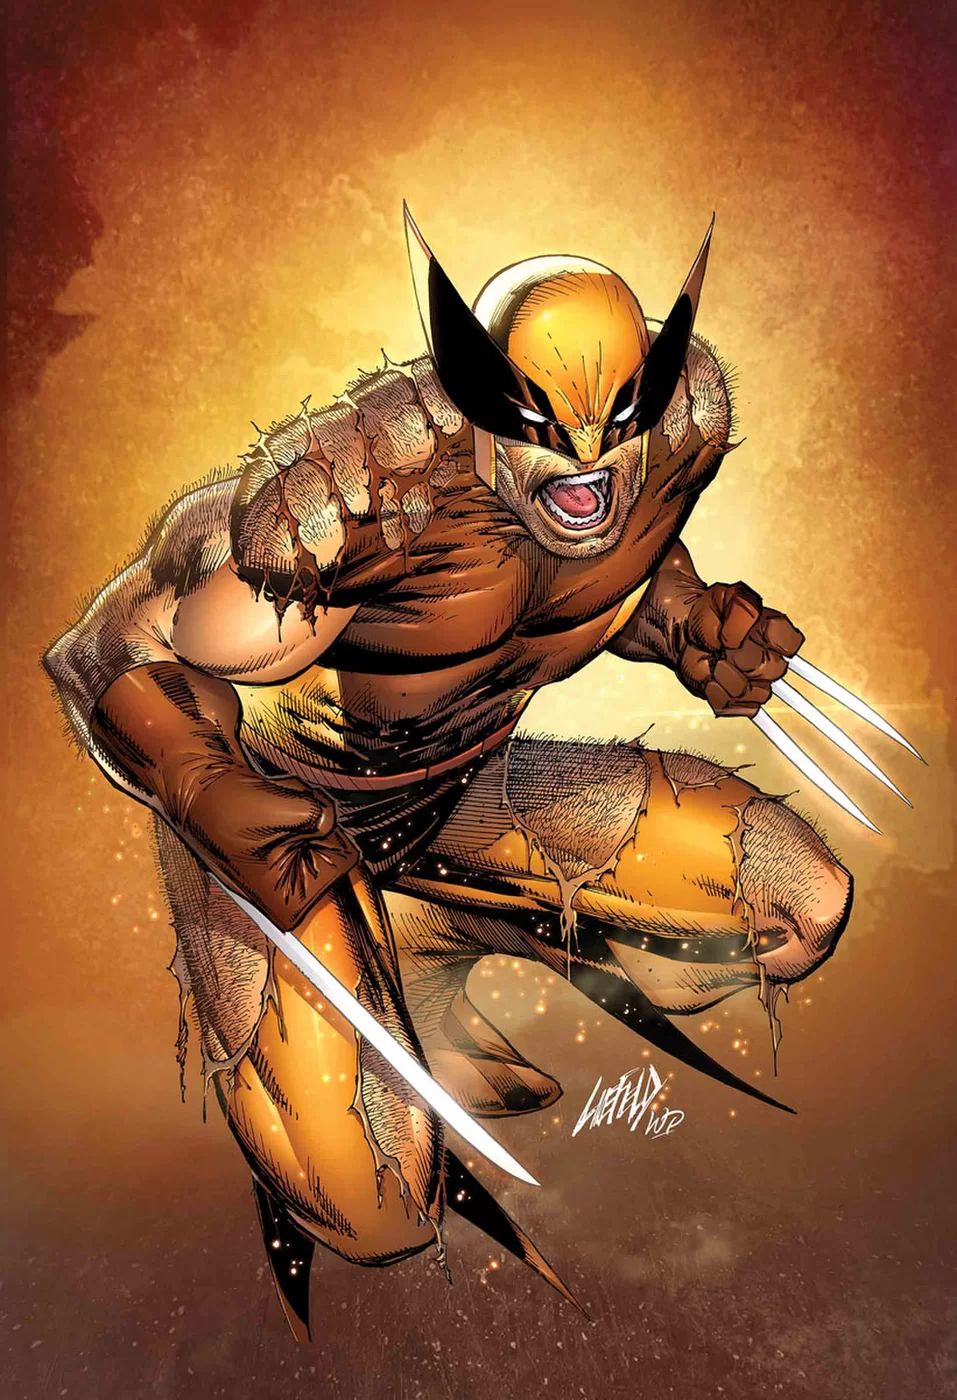 Wolverine: Exit Wounds